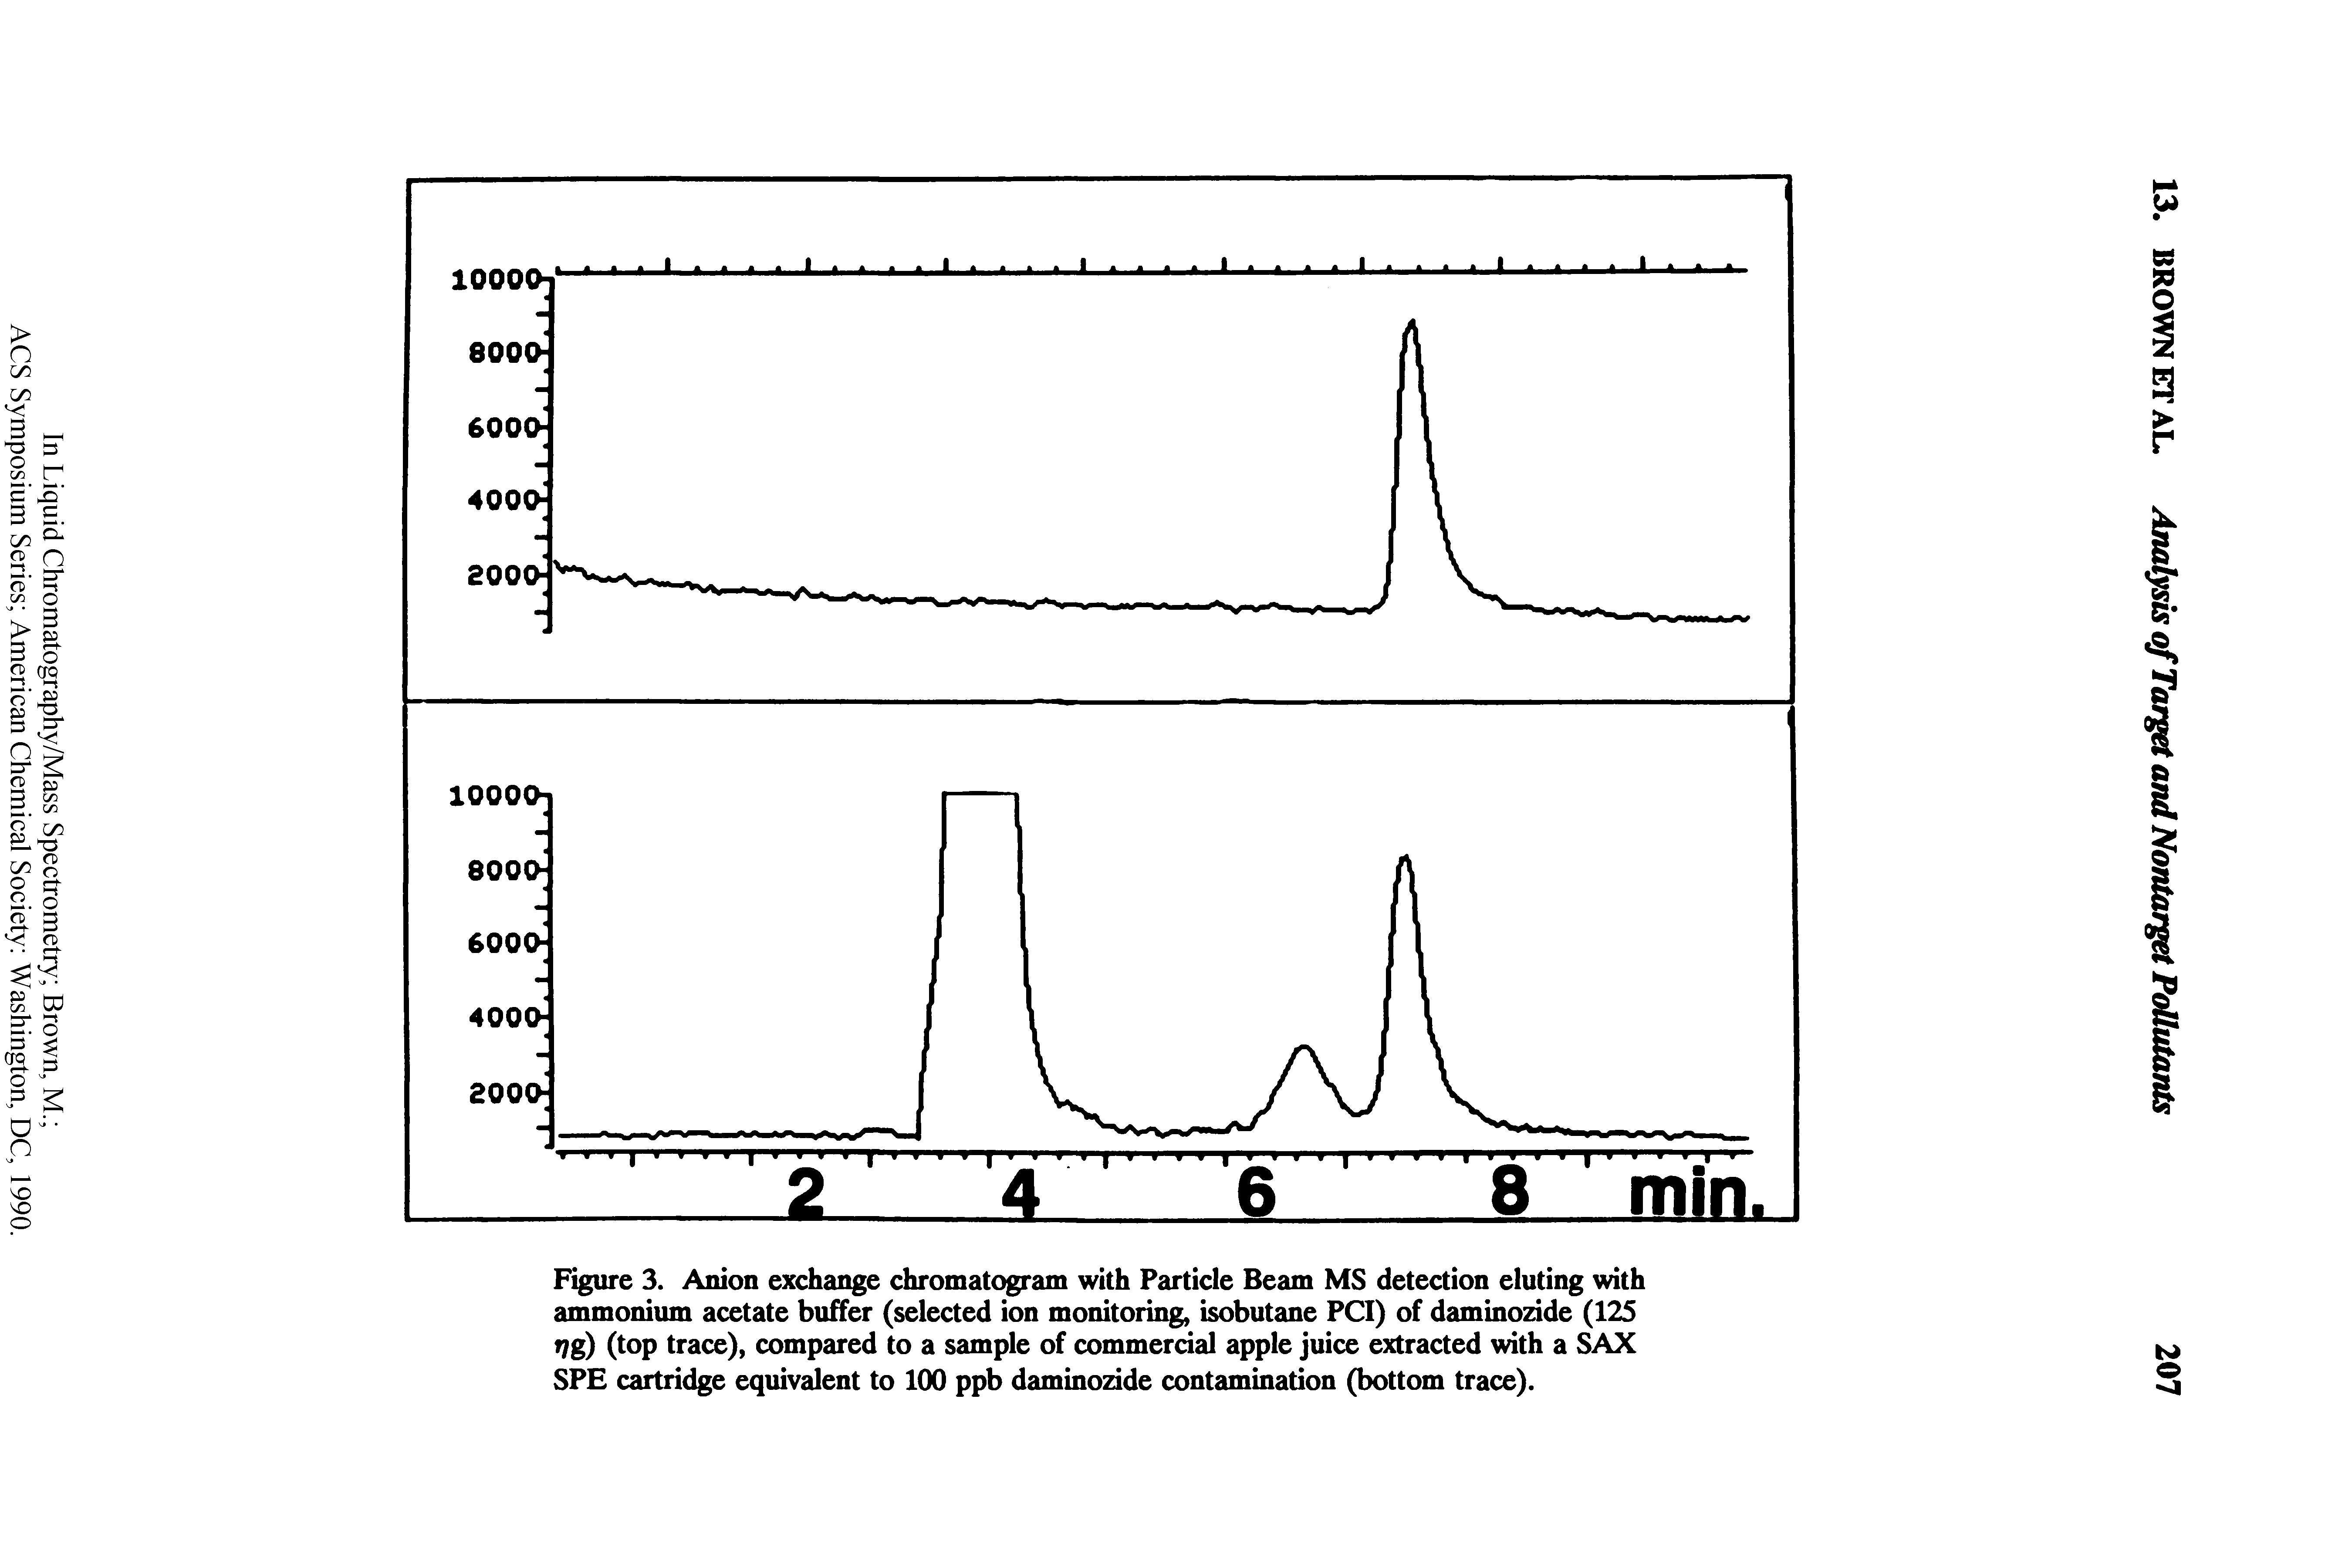 Figure 3. Anion exchange chromatogram with Particle Beam MS detection eluting with ammonium acetate buffer (selected ion monitoring, isobutane PCI) of daminozide (125 rjg) (top trace), compared to a sample of commercial apple juice extracted with a SAX SPE cartridge equivalent to 100 ppb daminozide contamination (bottom trace).